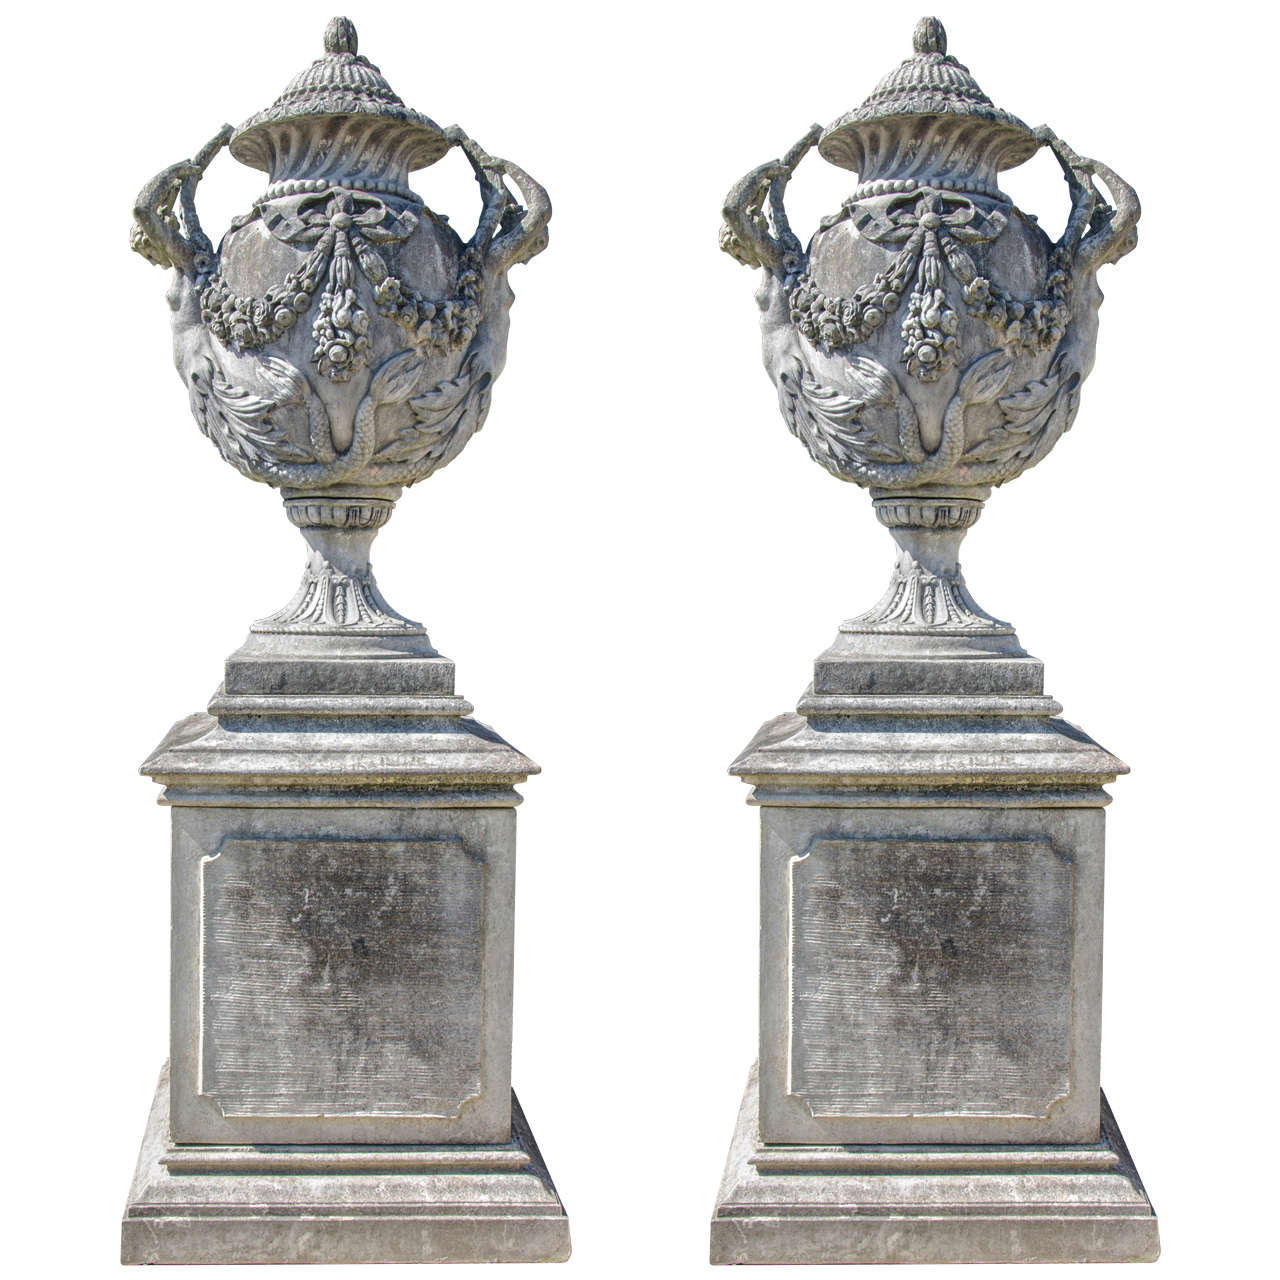 Pair of Large Ornate Stone Urns on Plinths For Sale